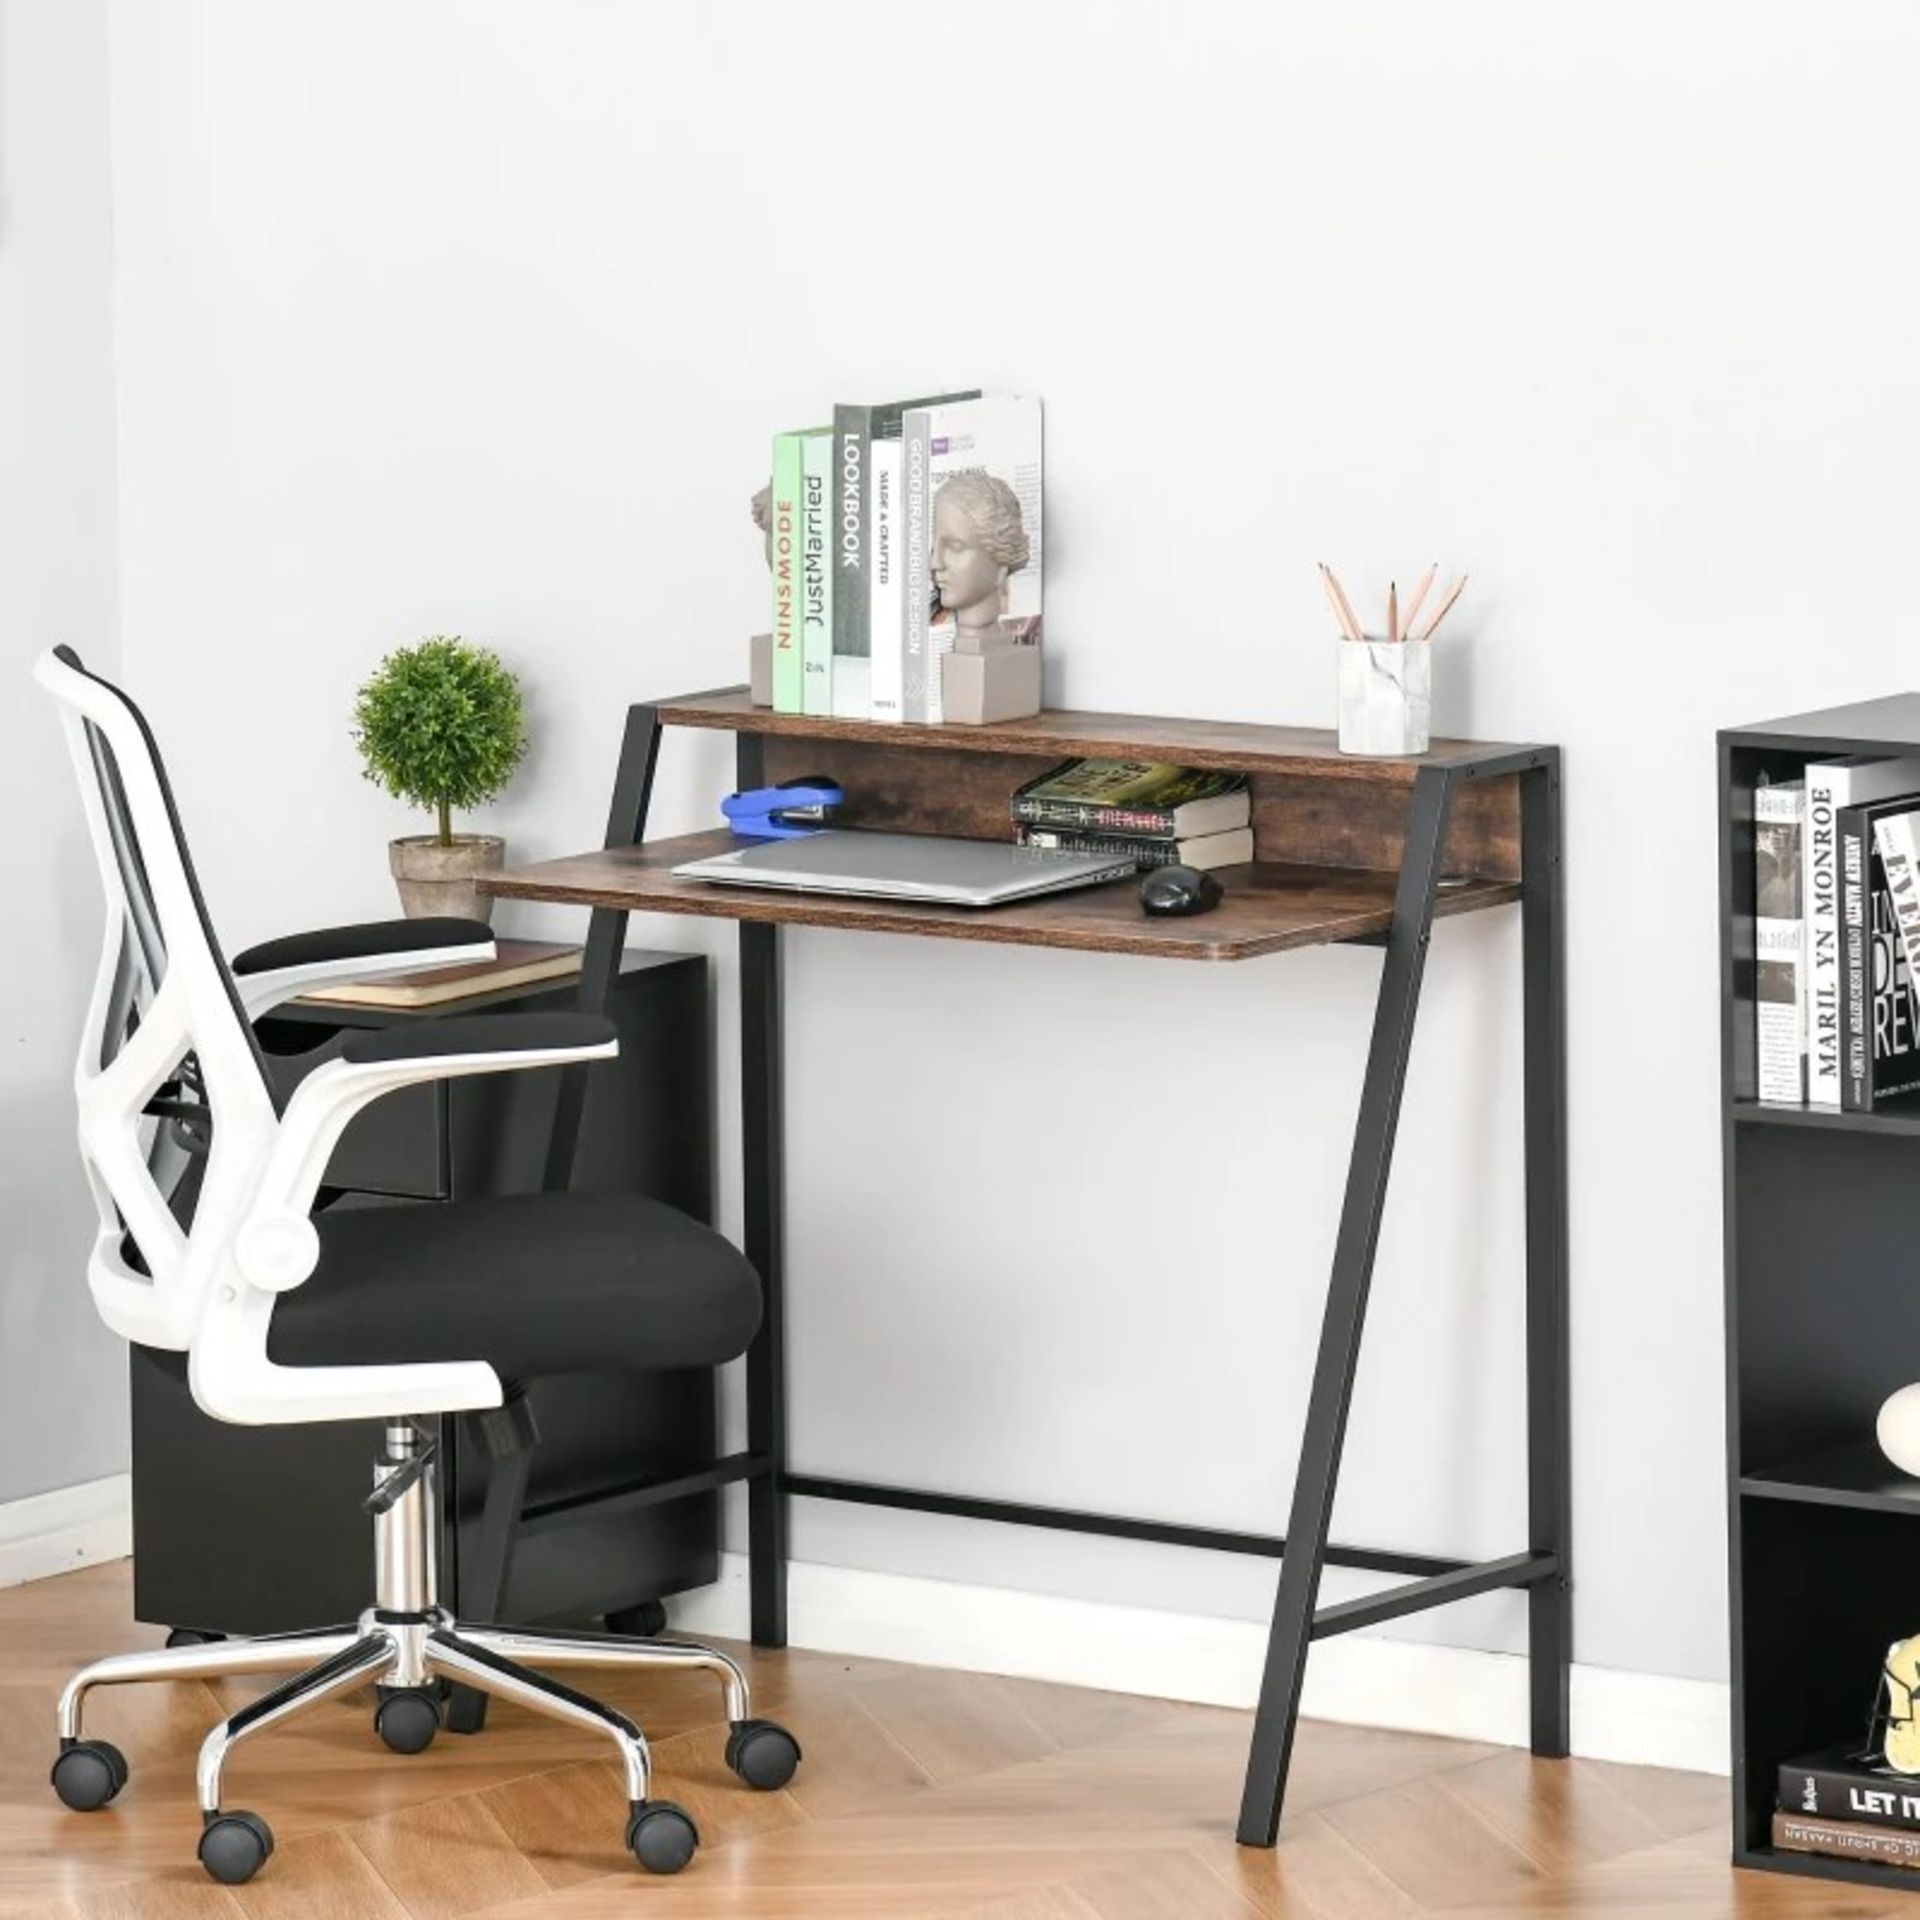 RRP £61.99 - Industrial-Style Open Writing Desk, with Top Shelf - Brown - 85H x 84L x 45Wcm. Top - Image 2 of 5